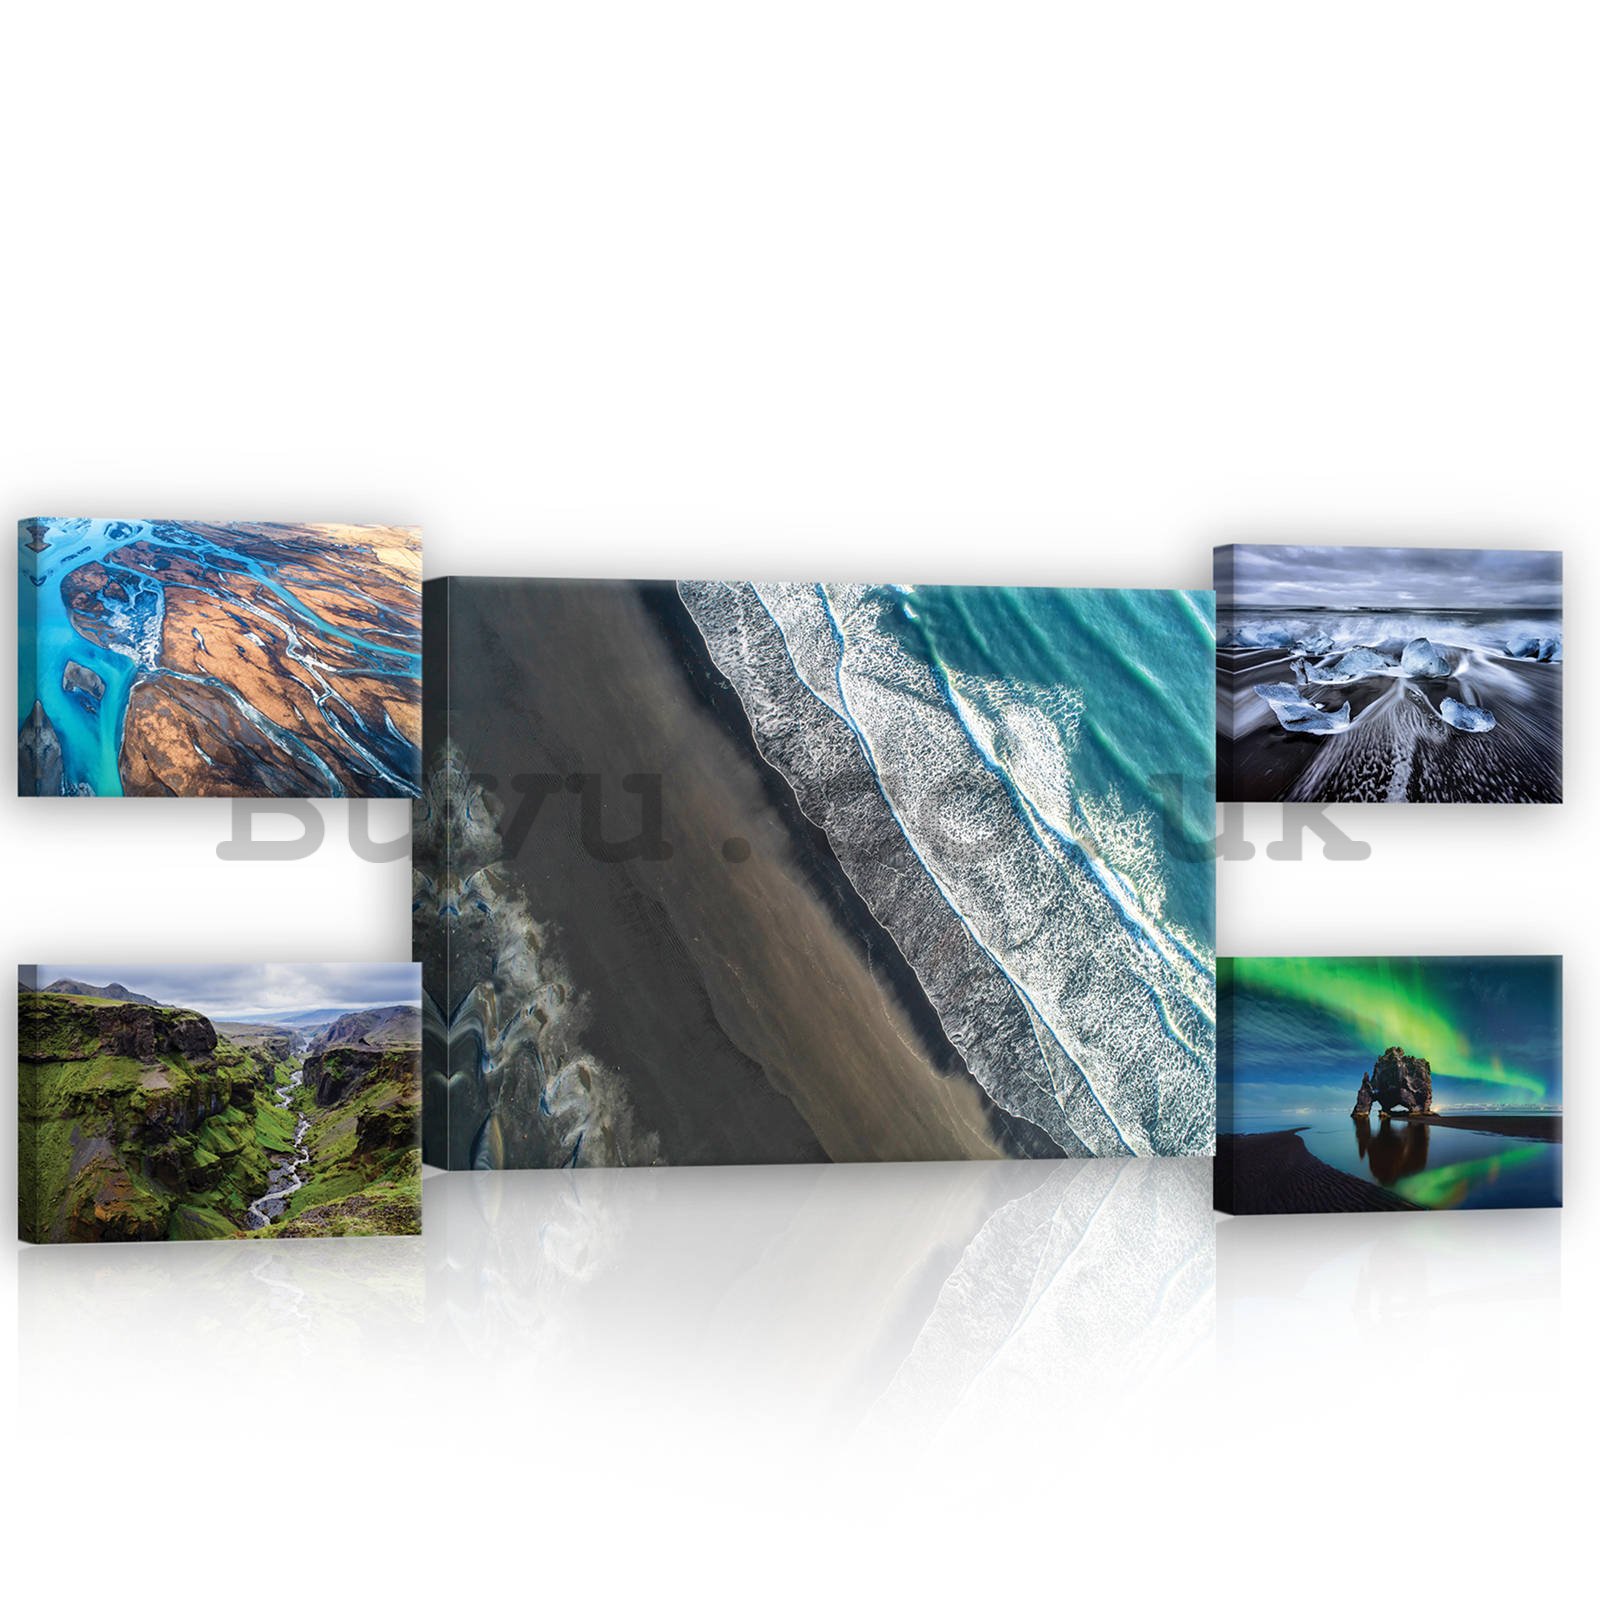 Painting on canvas: Multicolored views (1) - set 1pc 70x50 cm and 4pc 32,4x22,8 cm